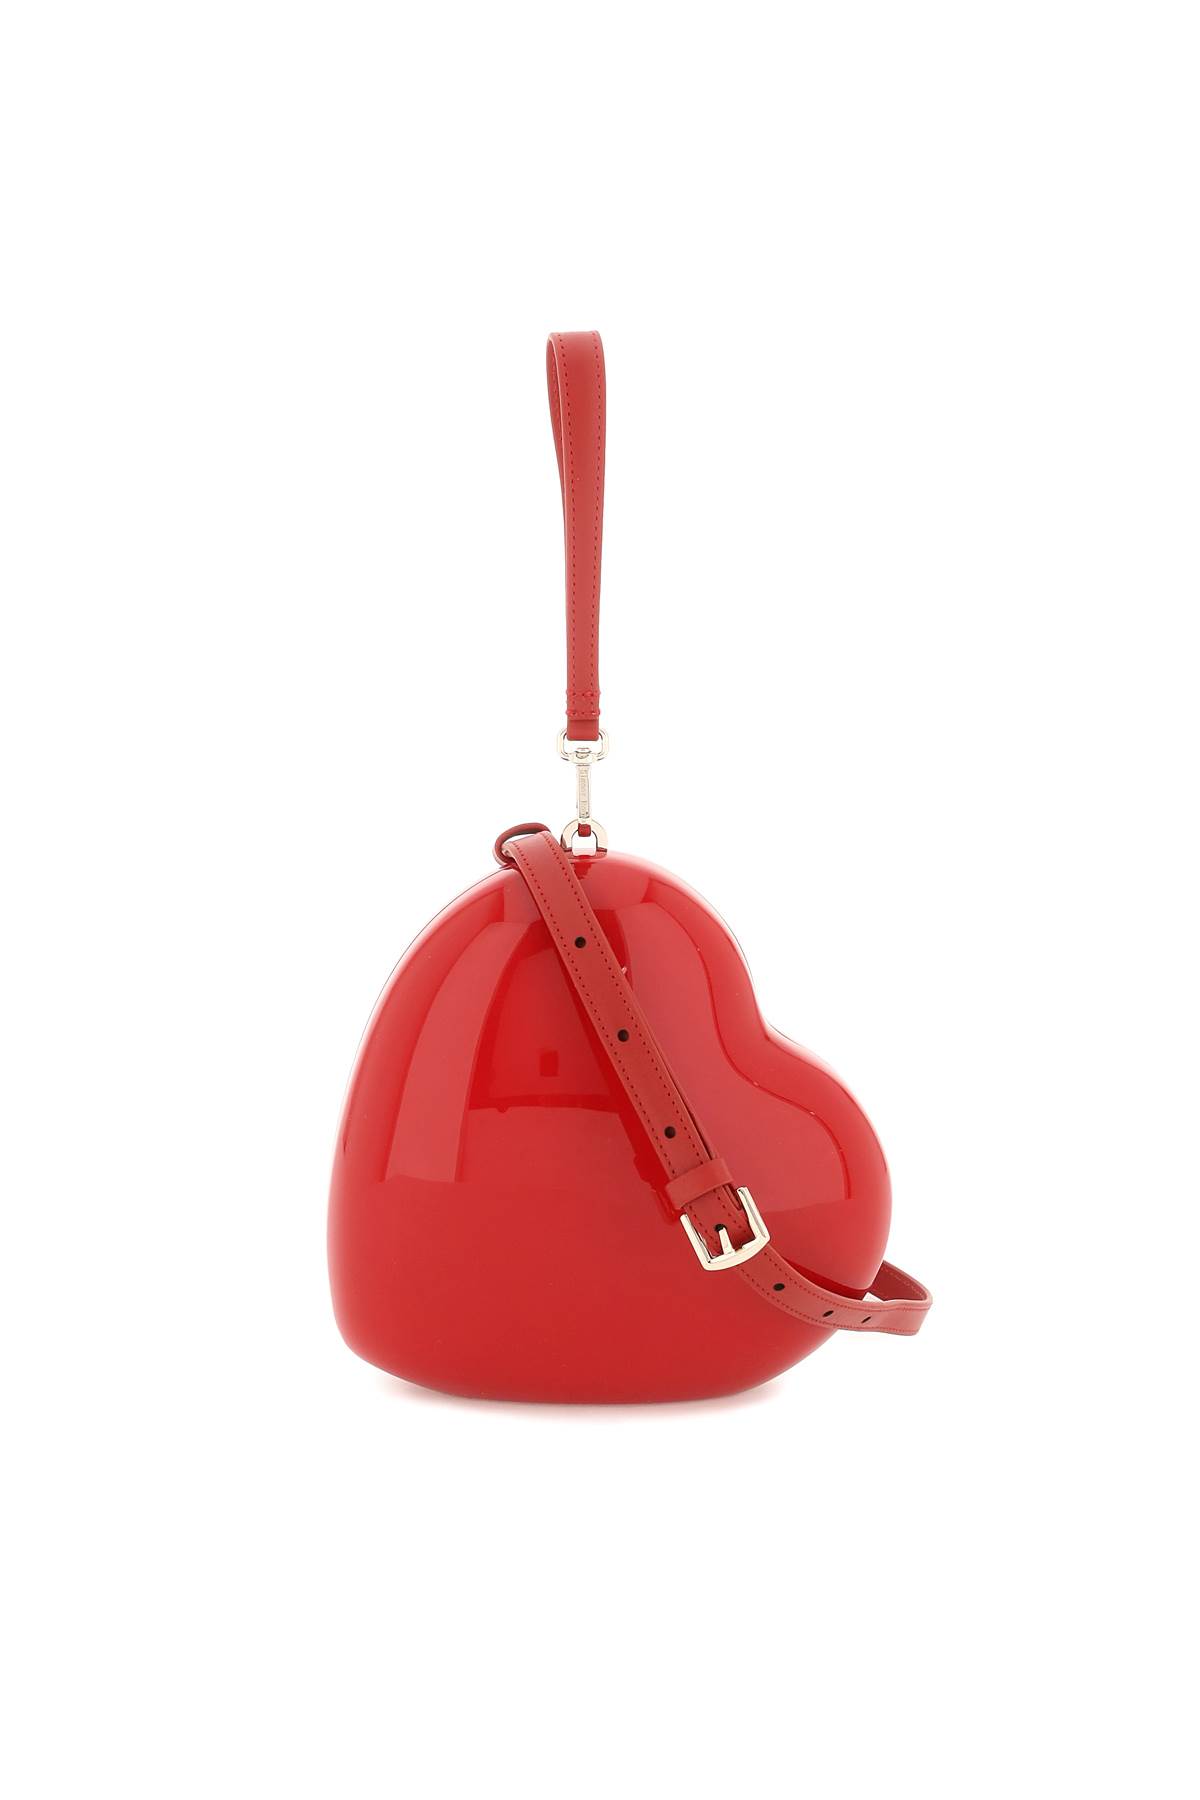 Simone Rocha Heart Bag With Leather Strap